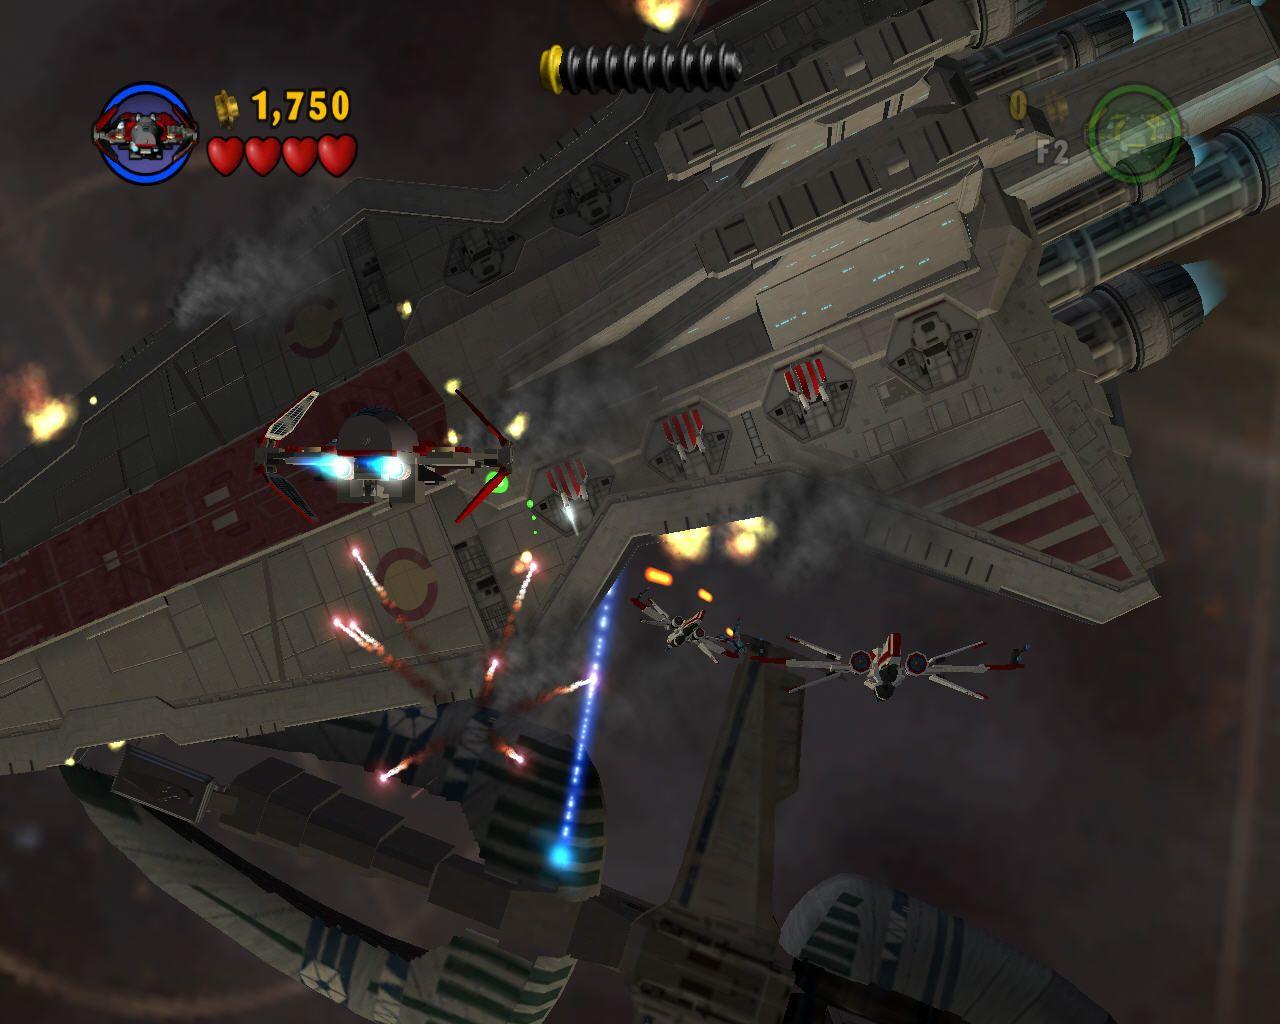 LEGO Star Wars: The Video Game Screenshots for Windows